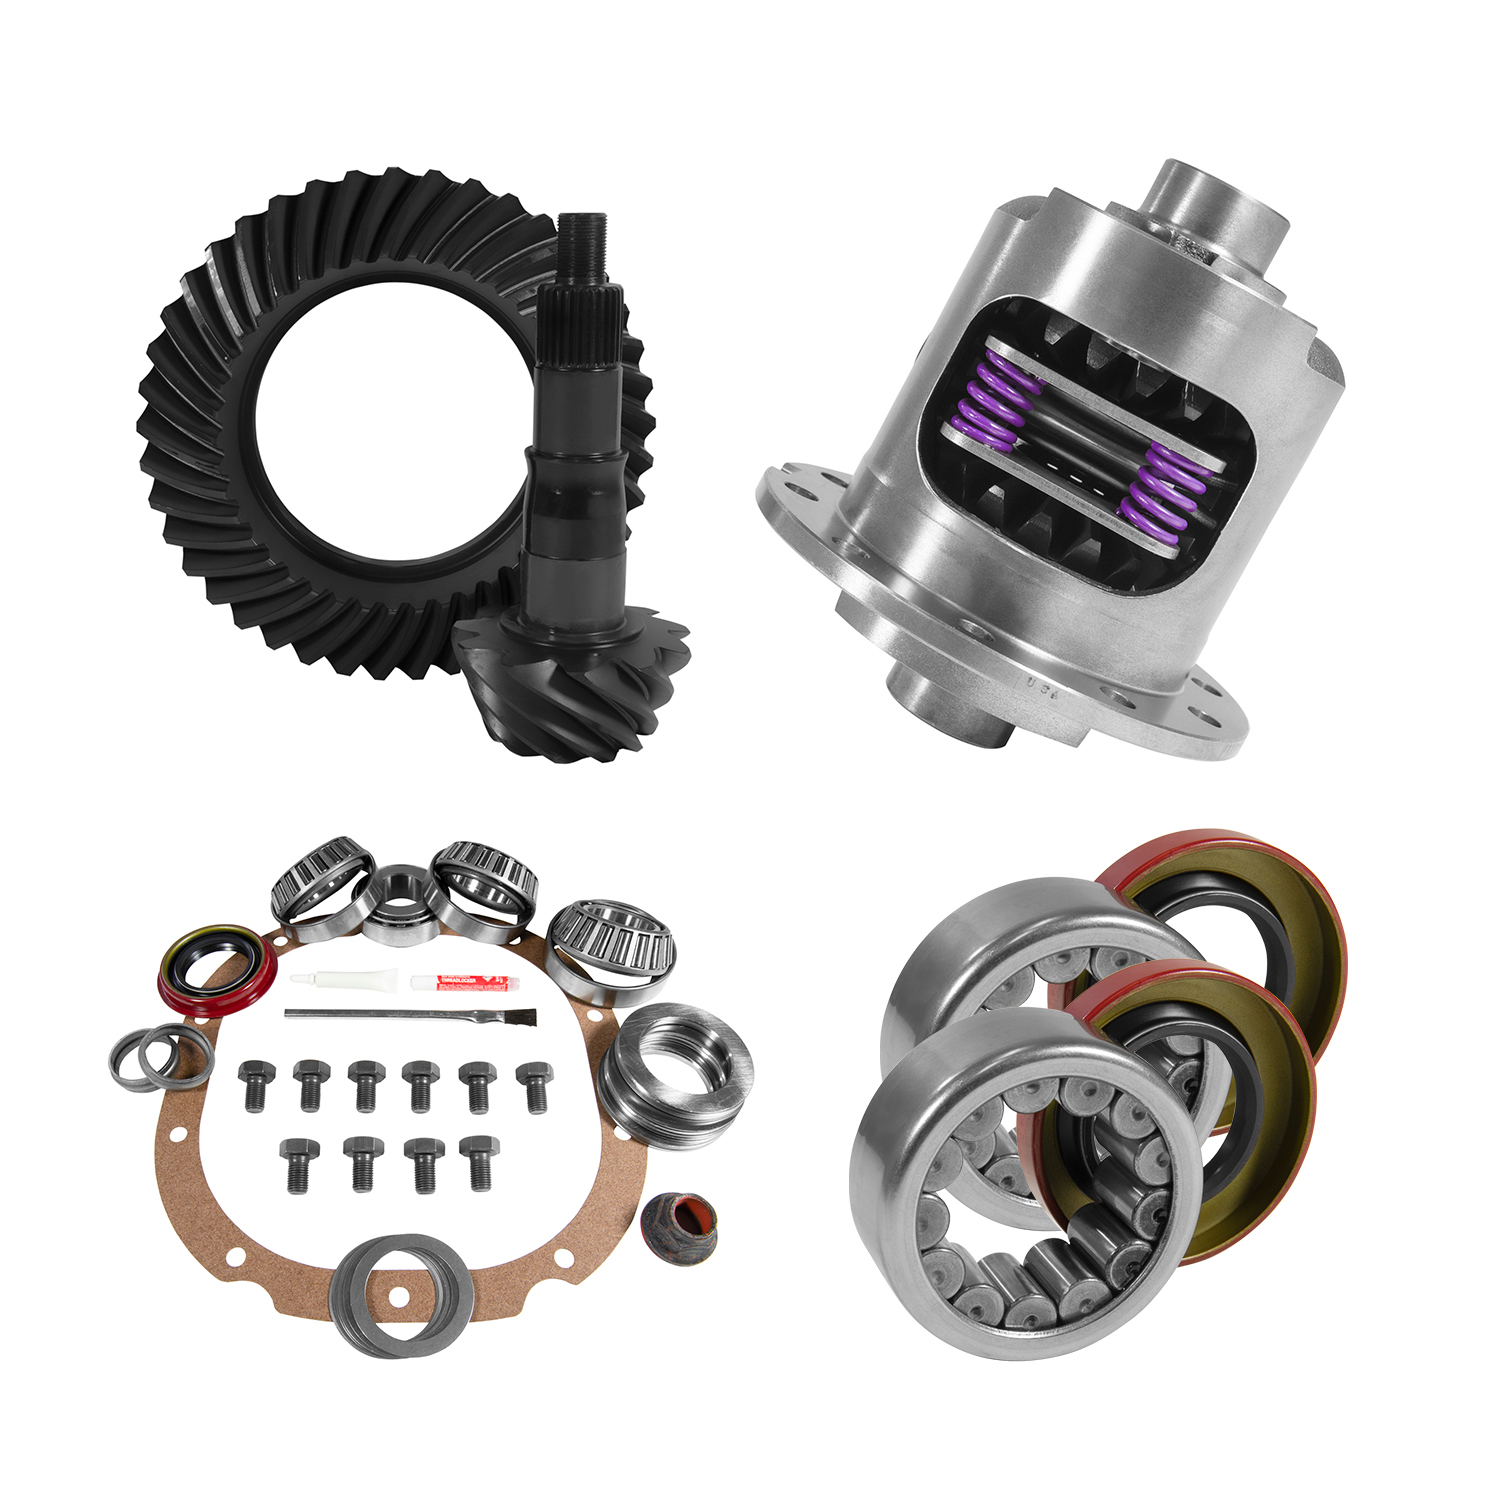 8.8 in. Ford 3.55 Rear Ring & Pinion, Install Kit, 31Spl Posi, 2.99 in. Axle Bearings